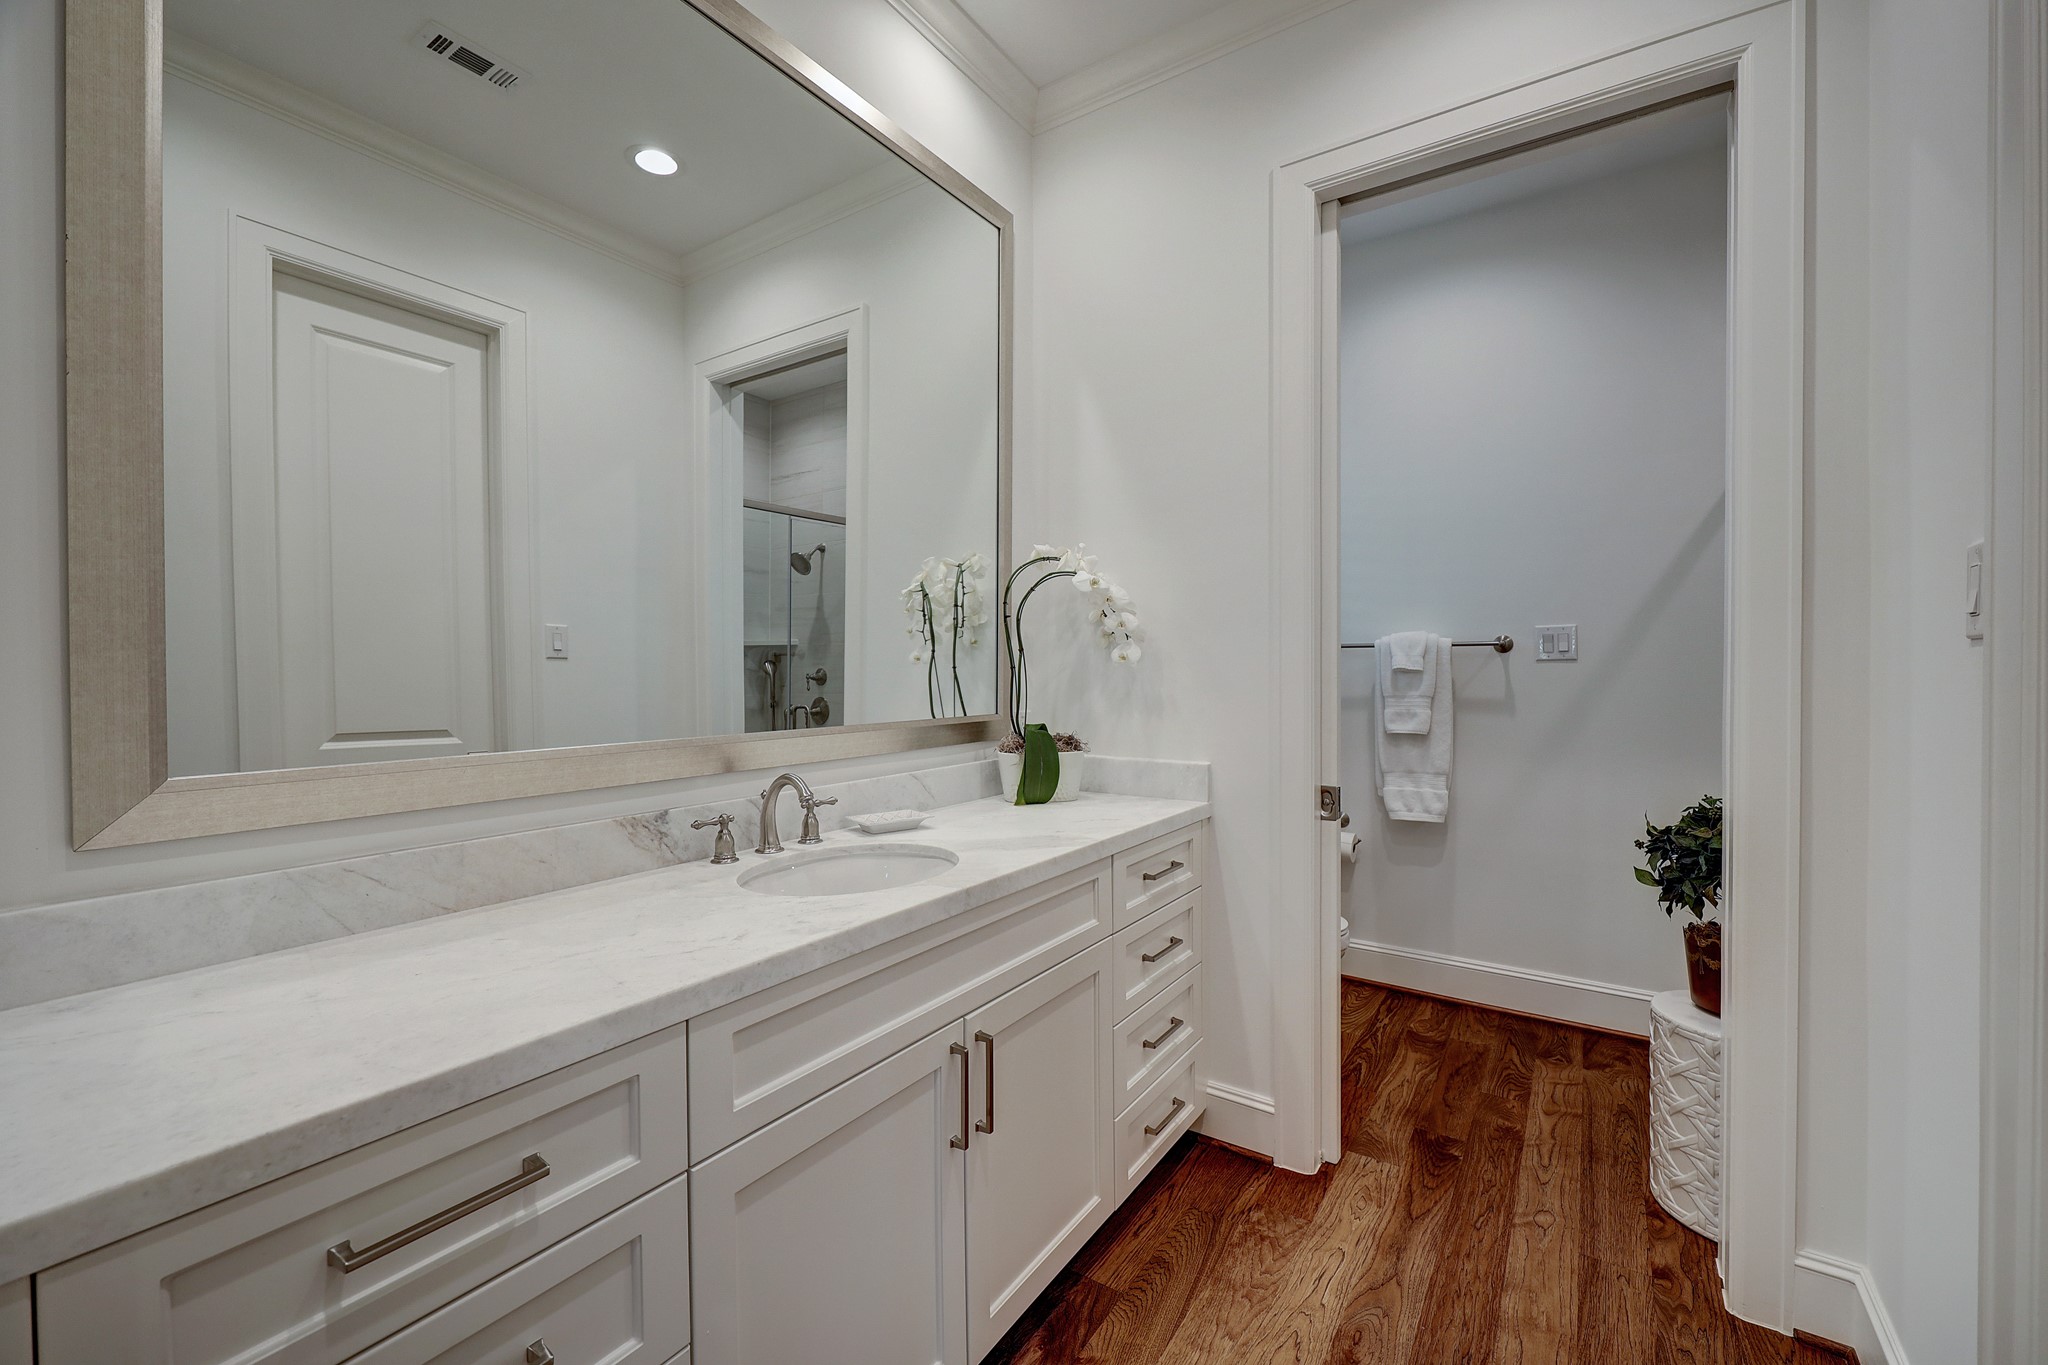 The ensuite guest bathroom features an oversized honed marble counter, large walk-in closet with custom shelving, dual head walk-in shower with seat and hand mount shower head.